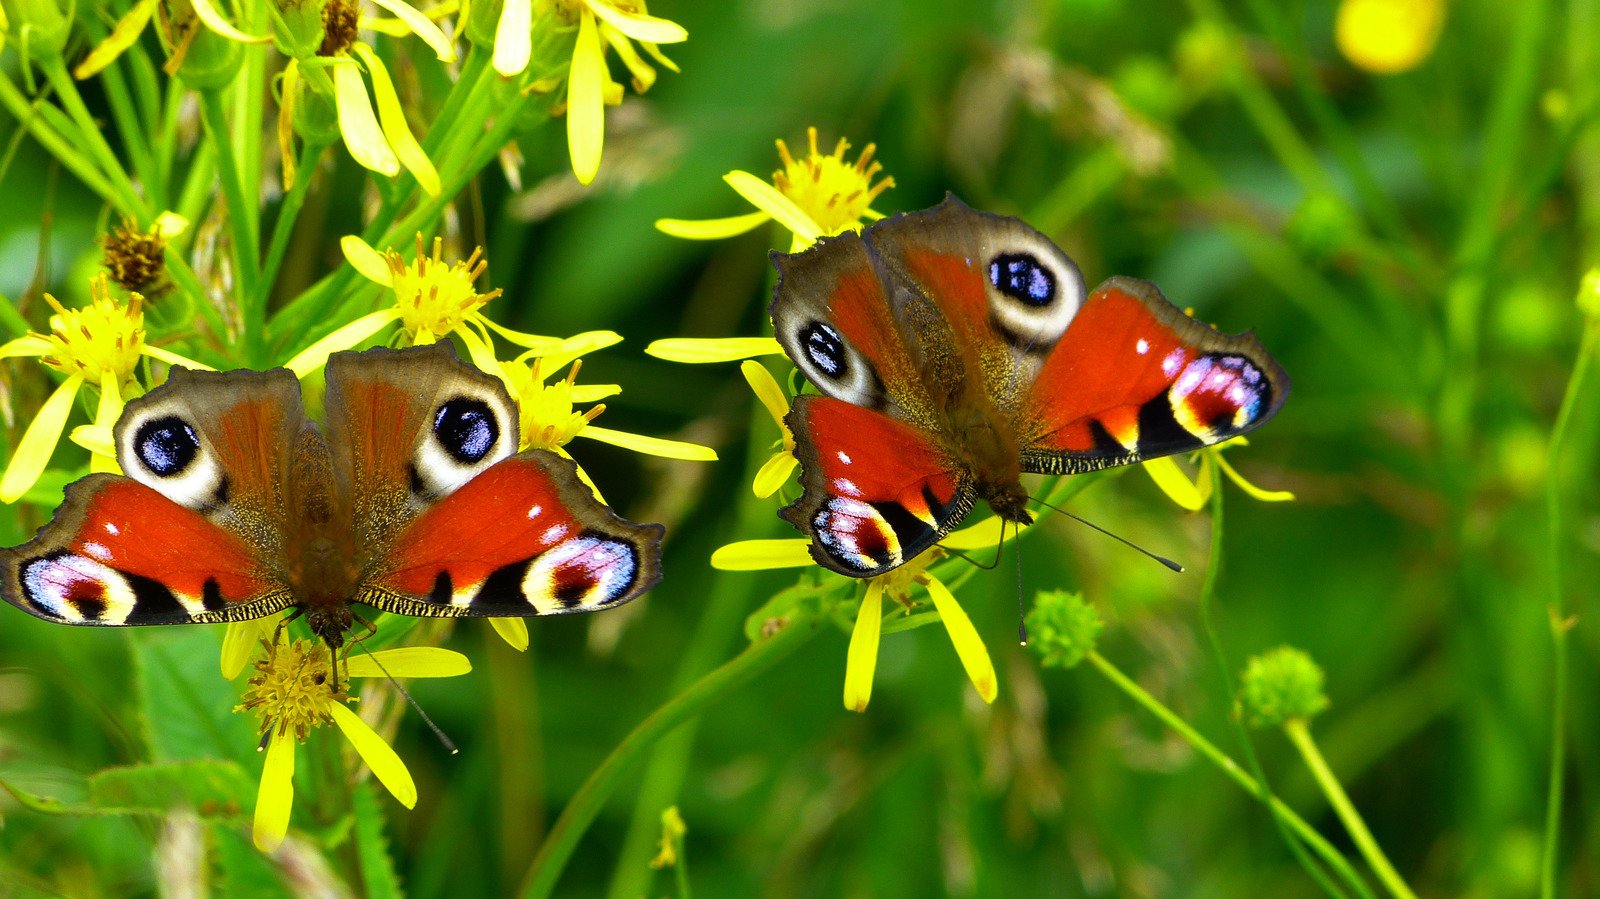 2 Peacock Butterflies Perched on Yellow Flower in Close Up Photography during Daytime